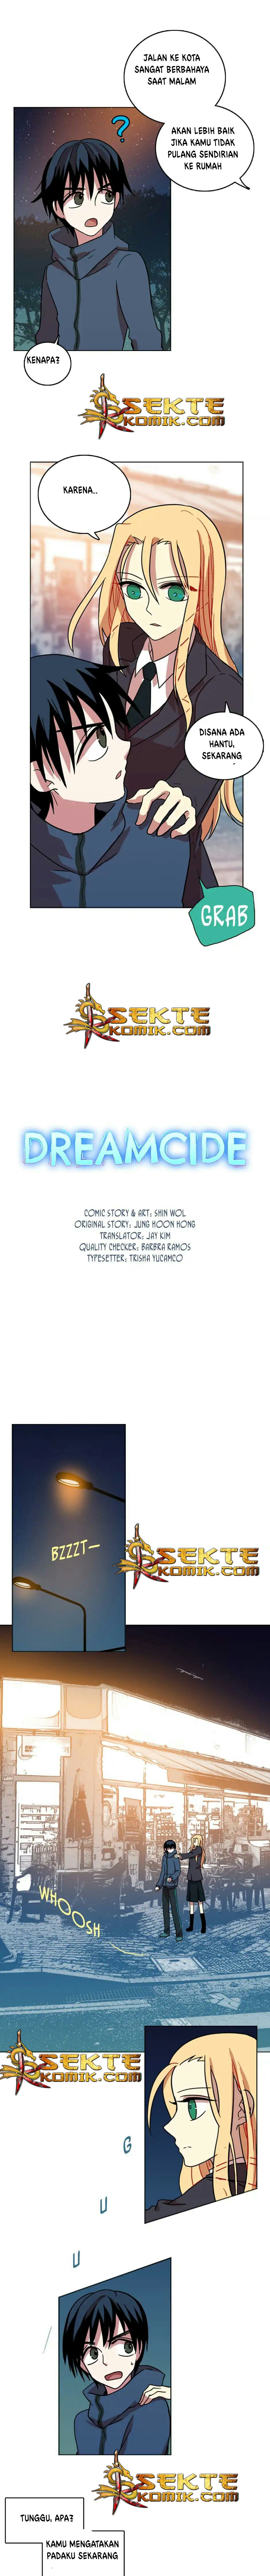 Dreamside Chapter 16